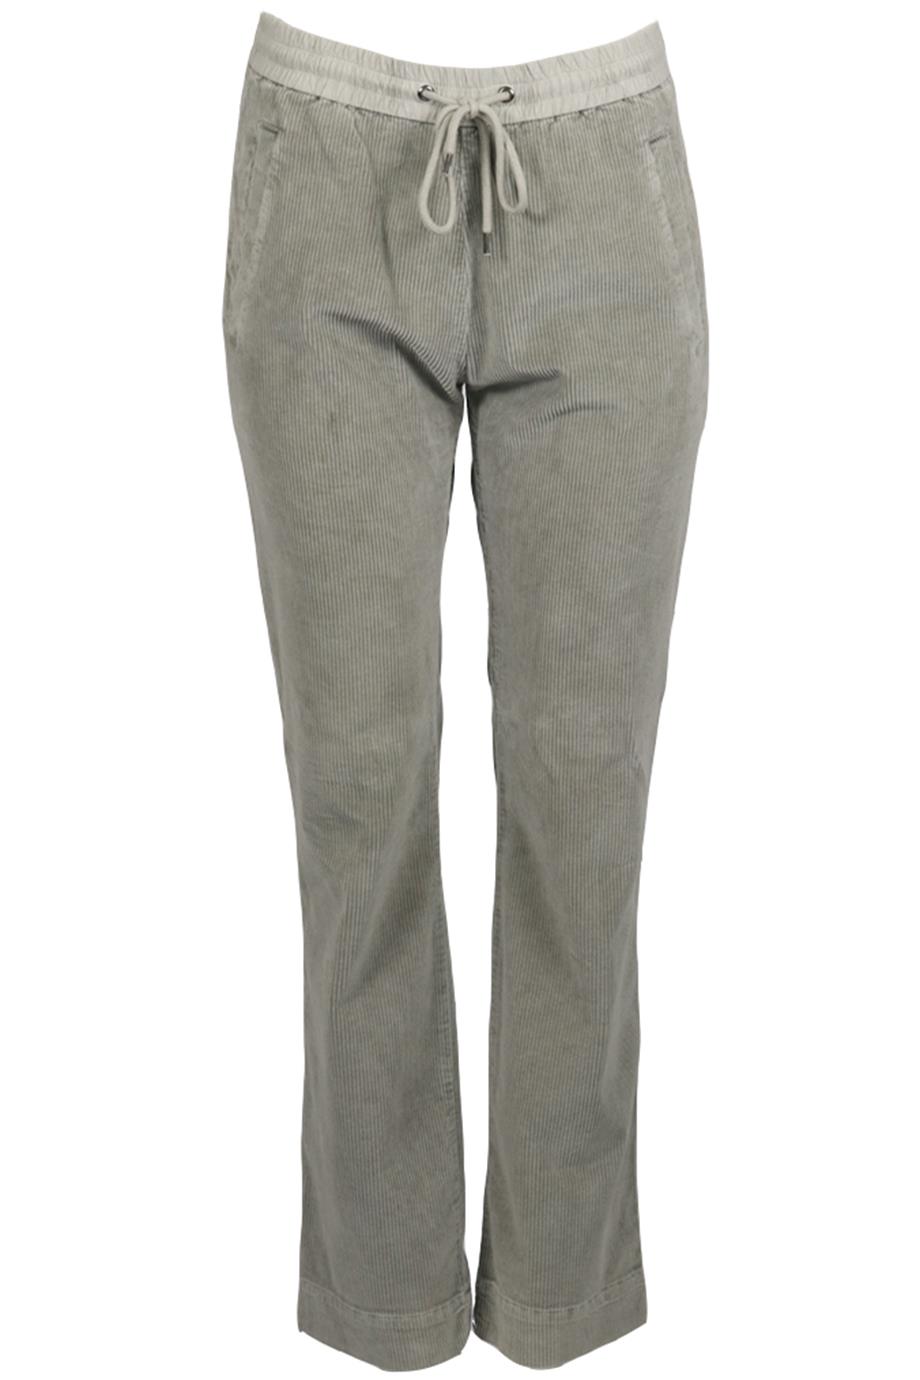 JAMES PERSE CORDUROY TAPERED PANTS SMALL